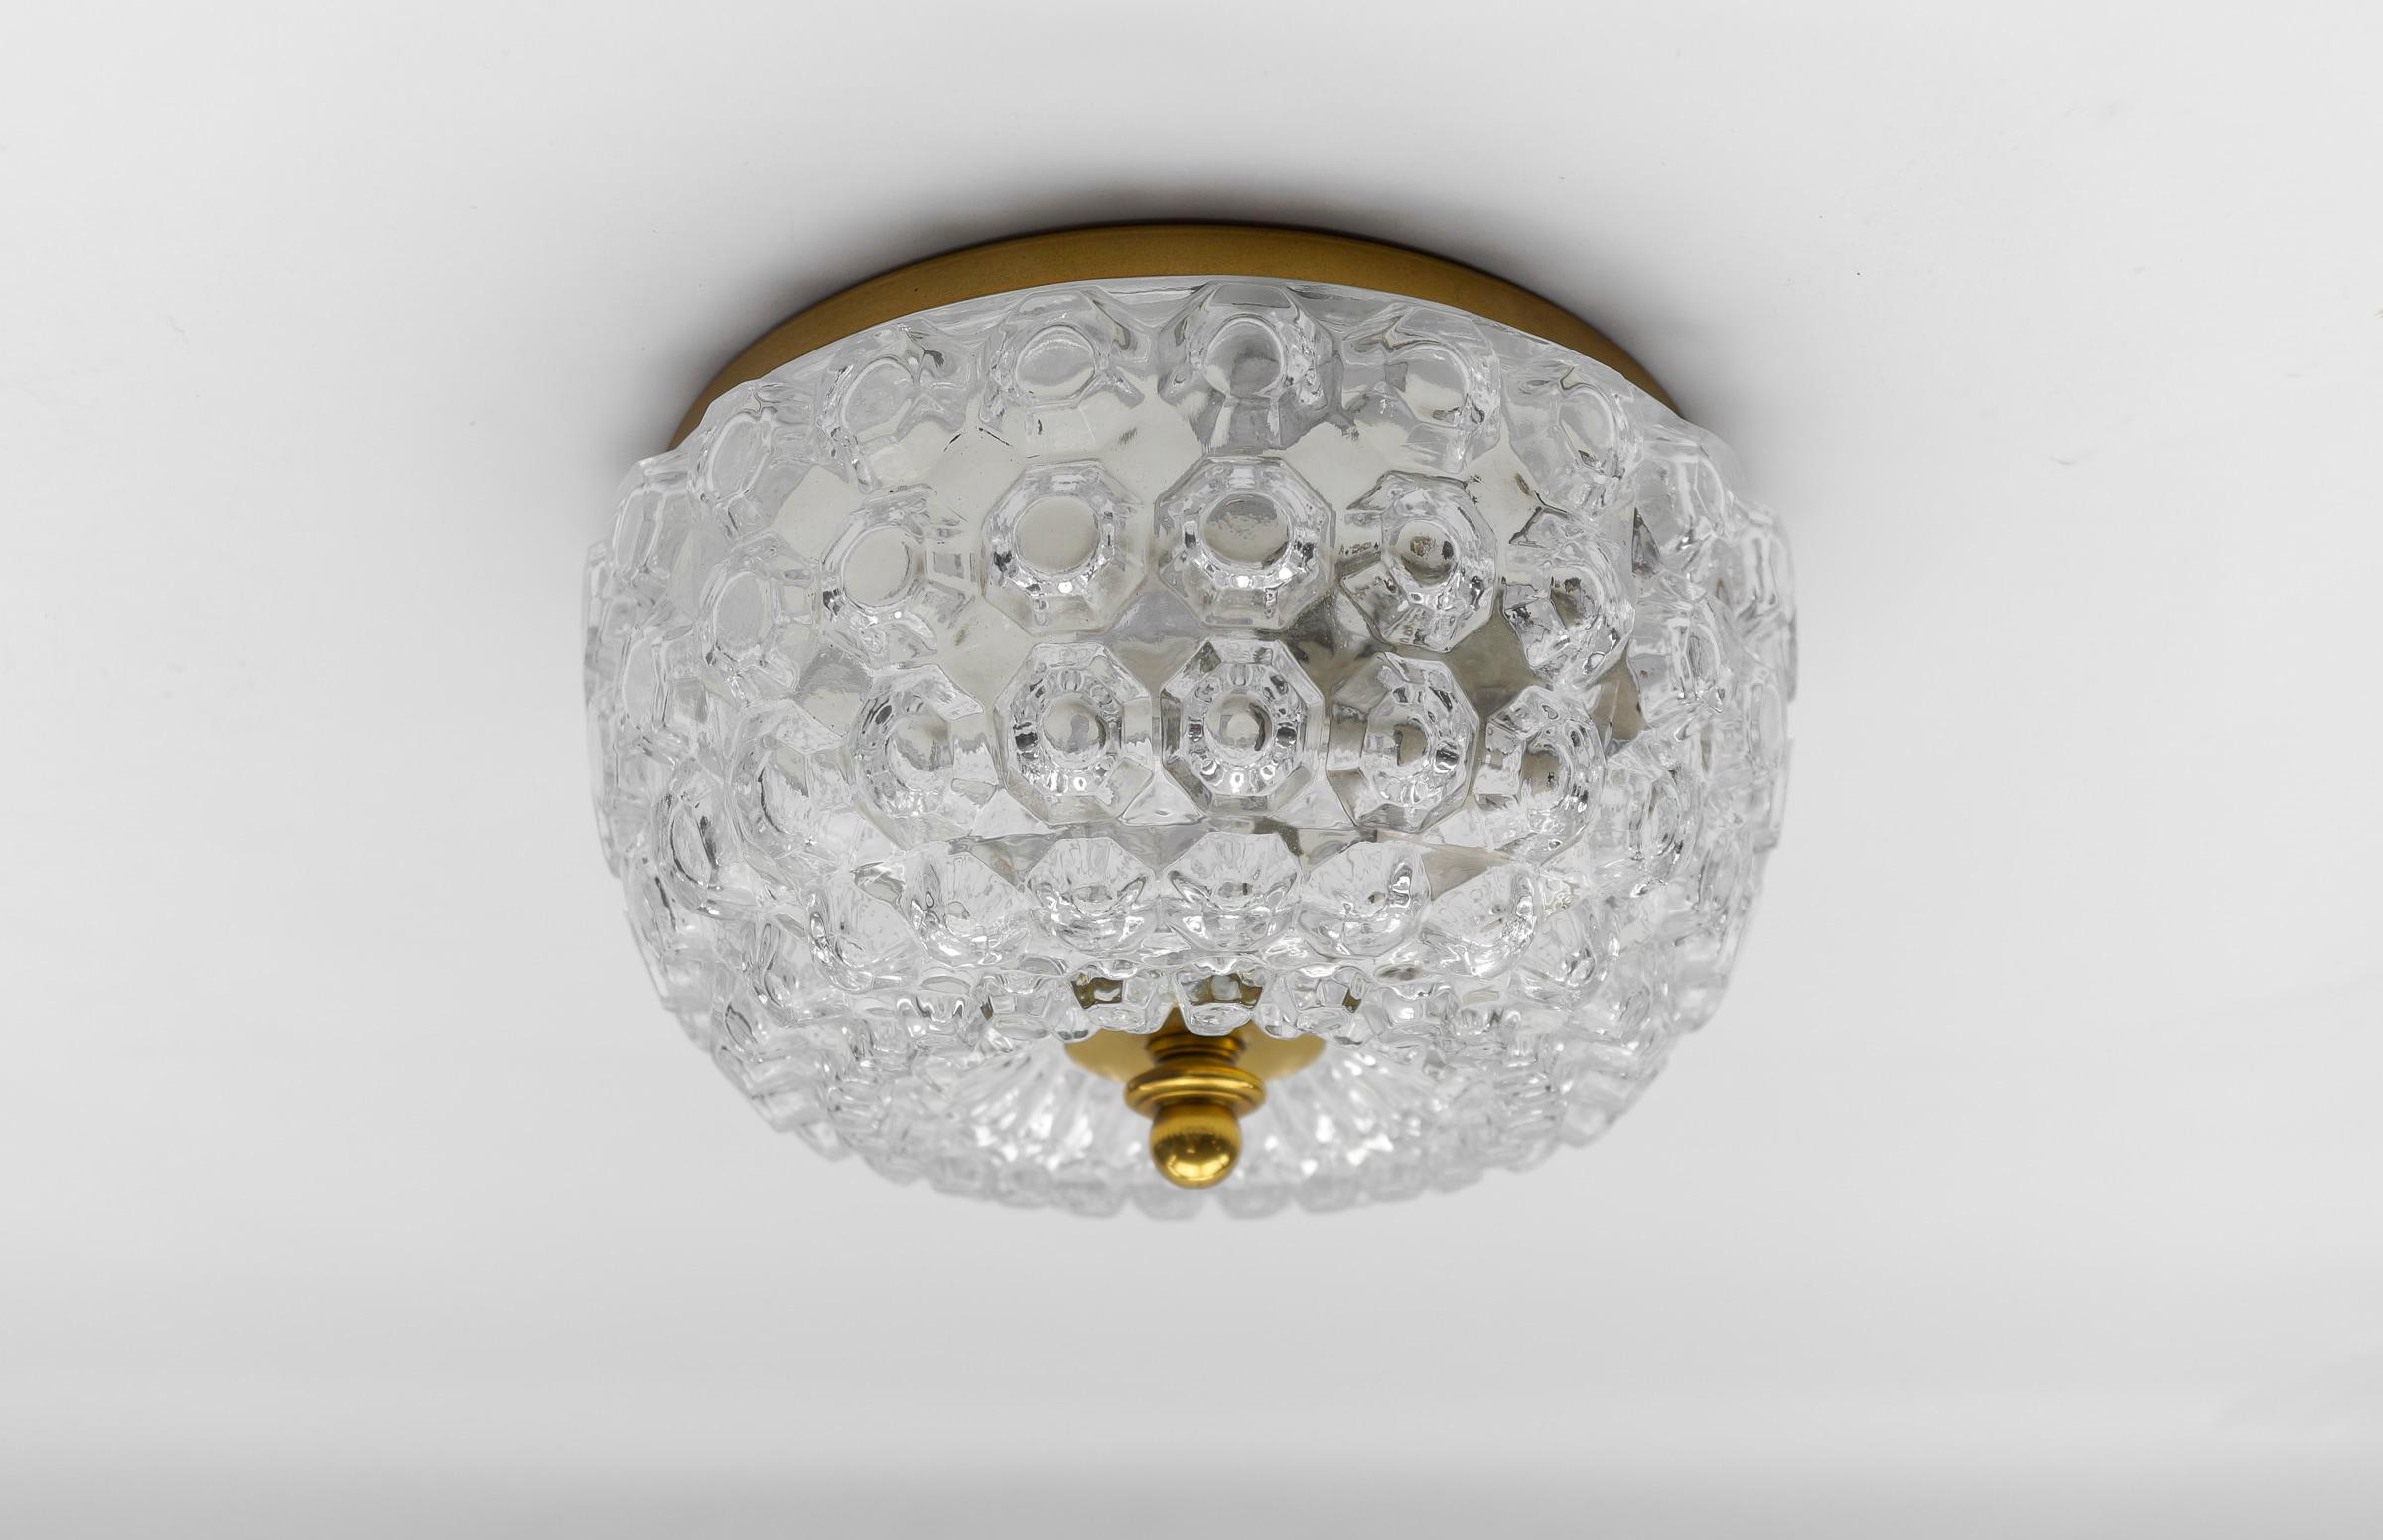 1 of 4 Elegant Flush Mount Lamp in Glass by Limburg, Gerrmany 1960s

We have four different sizes of the same model with 4 pieces per size which can also be found here on the platform.

The fixture need 1 x E27 standard bulb.

Light bulbs are not